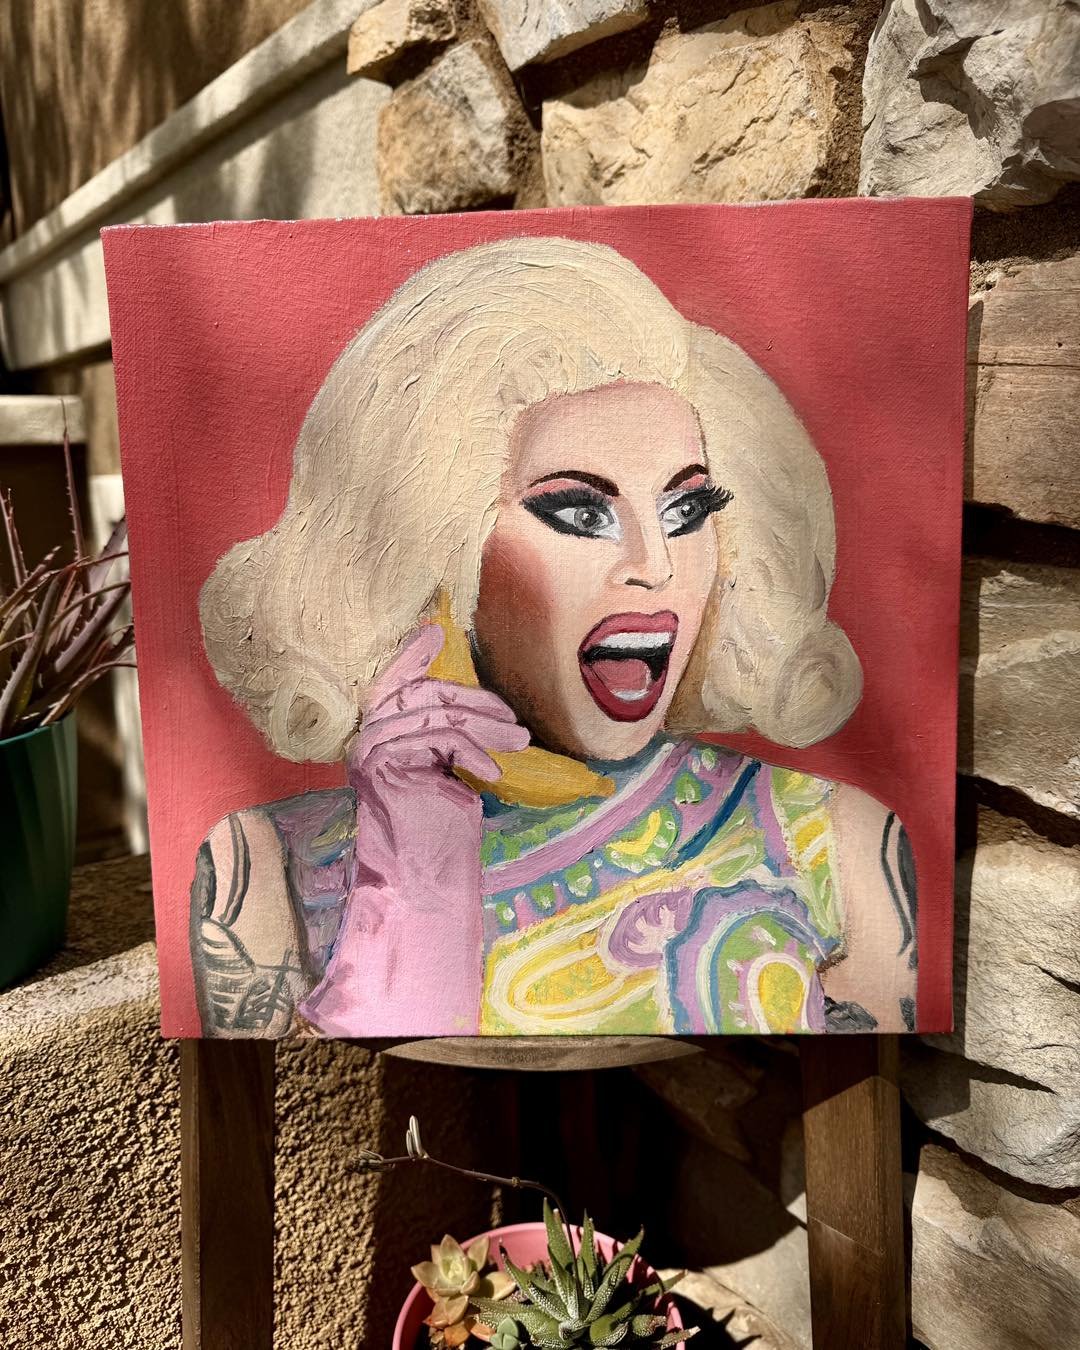 Happy to announce my latest portrait: Thworp
Inspired by this photo, my oil portrait of drag icon Katya measures 12x12&rdquo; on canvas board. Thworp is a reference to Katya&rsquo;s humor and way of accentuating the funny in any sentence by clacking 